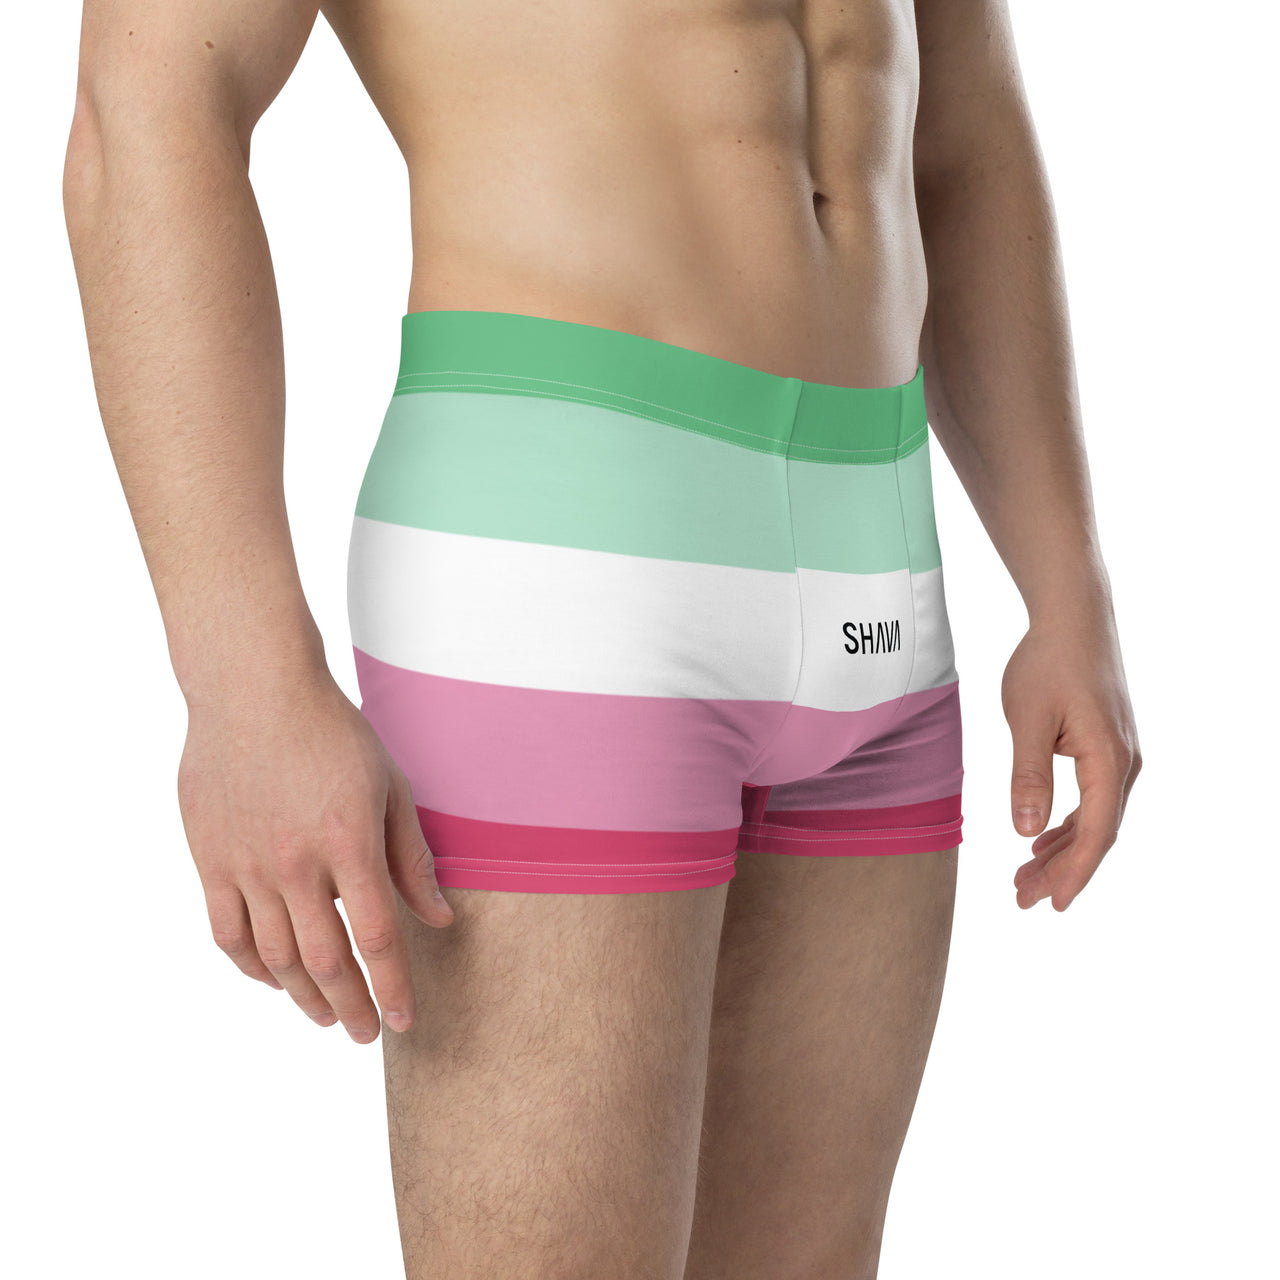 Abrosexual Flag LGBTQ Boxer for Her/Him or They/Them SHAVA